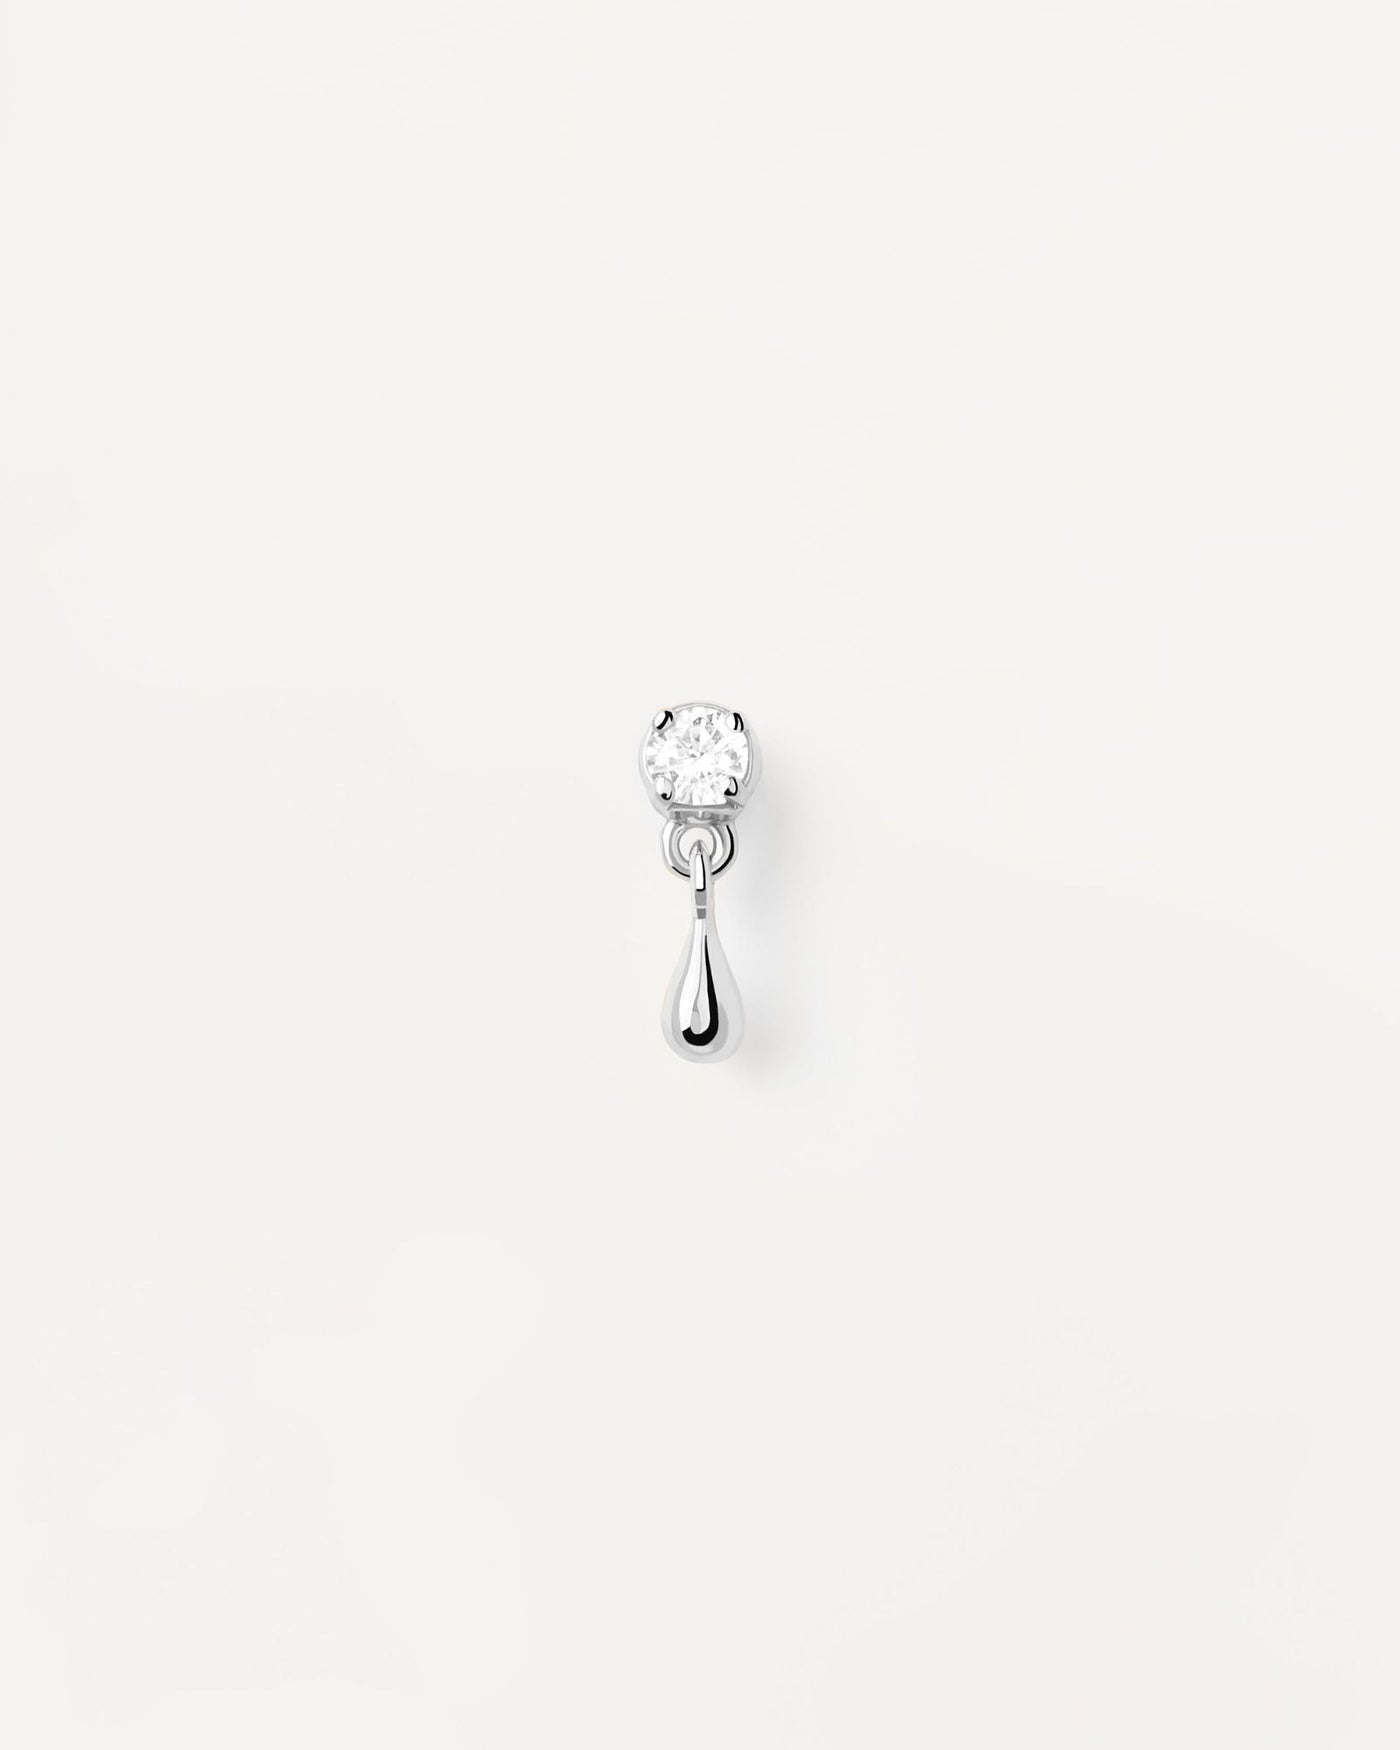 2024 Selection | Water silver single stud Earring. Sterling silver ear piercing with white zirconia and small drop pendant. Get the latest arrival from PDPAOLA. Place your order safely and get this Best Seller. Free Shipping.